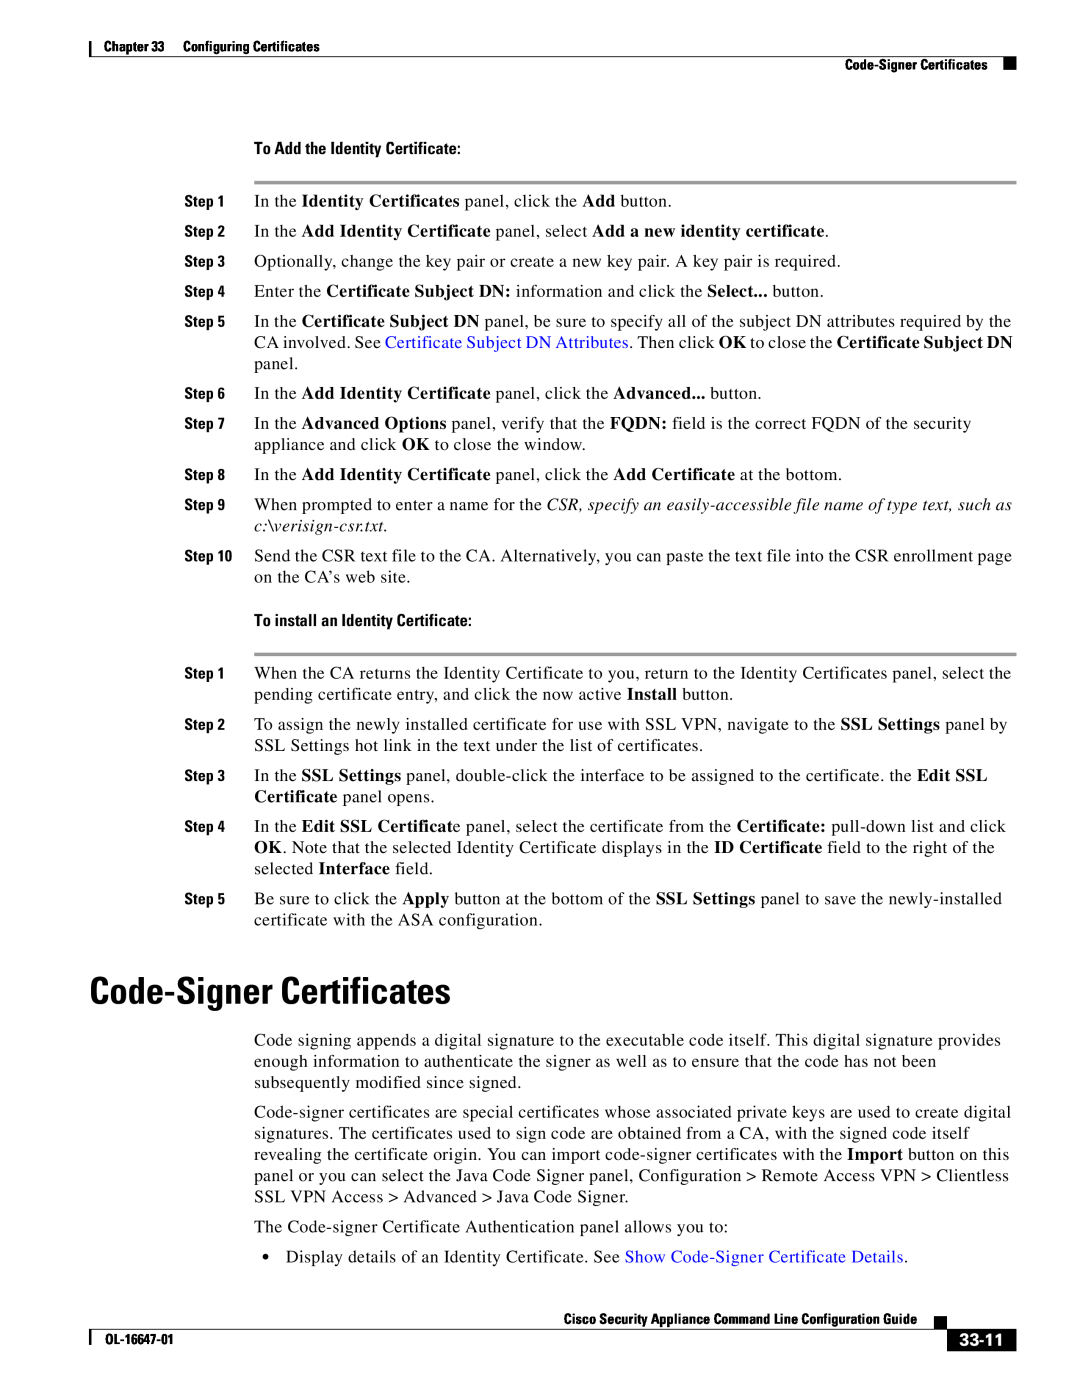 Cisco Systems OL-16647-01 Code-Signer Certificates, To Add the Identity Certificate, To install an Identity Certificate 